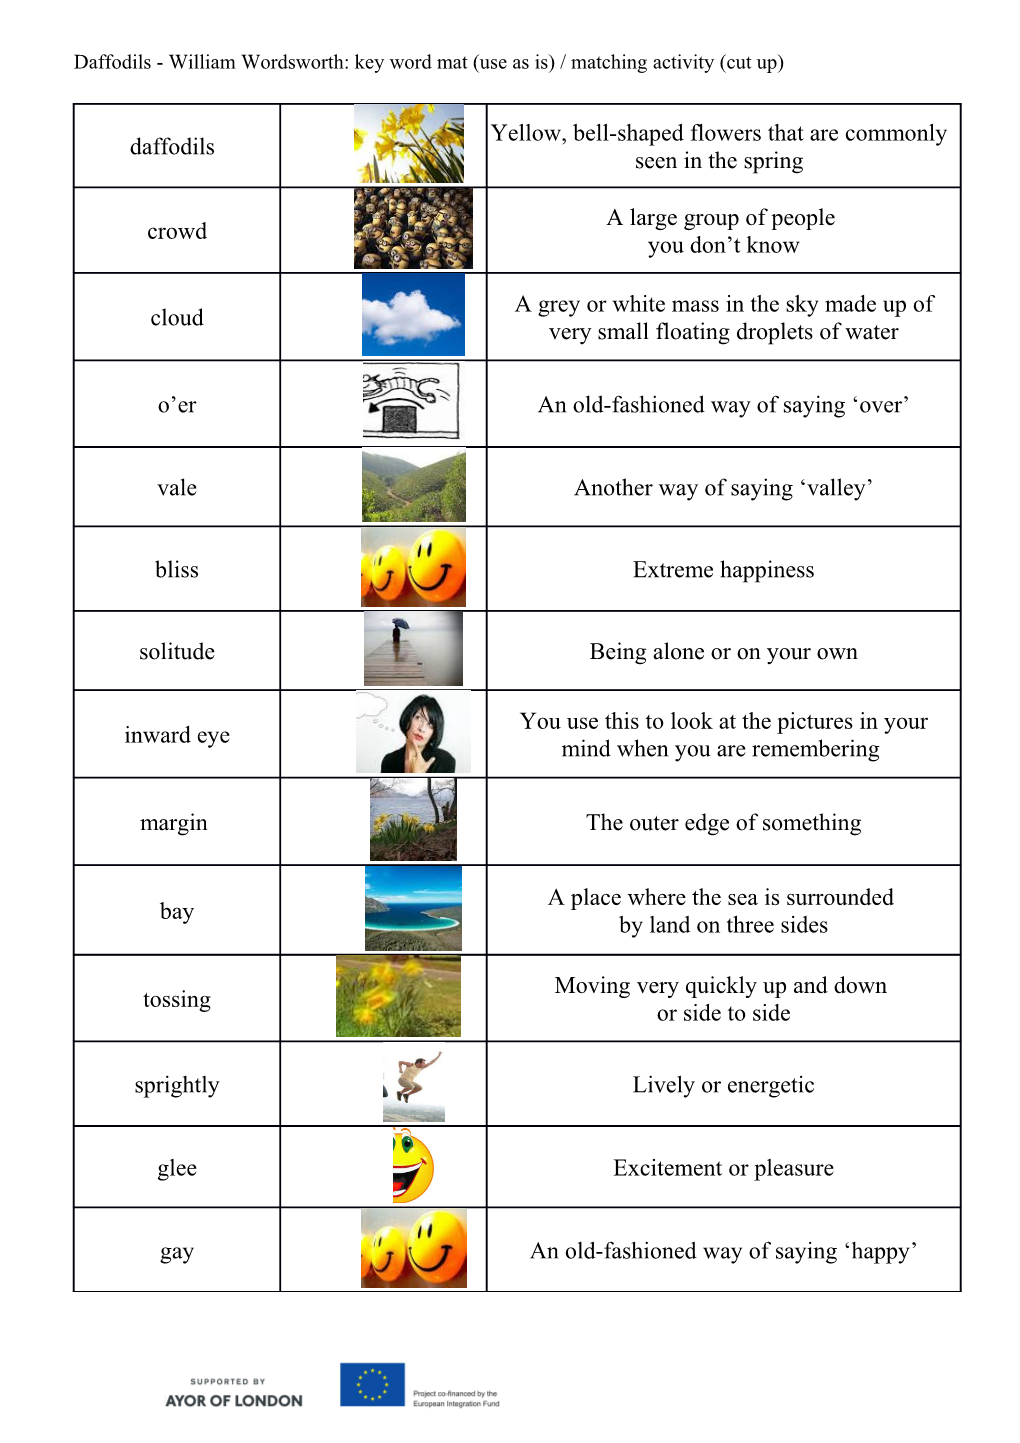 Daffodils - William Wordsworth: Key Word Mat (Use As Is) / Matching Activity (Cut Up)